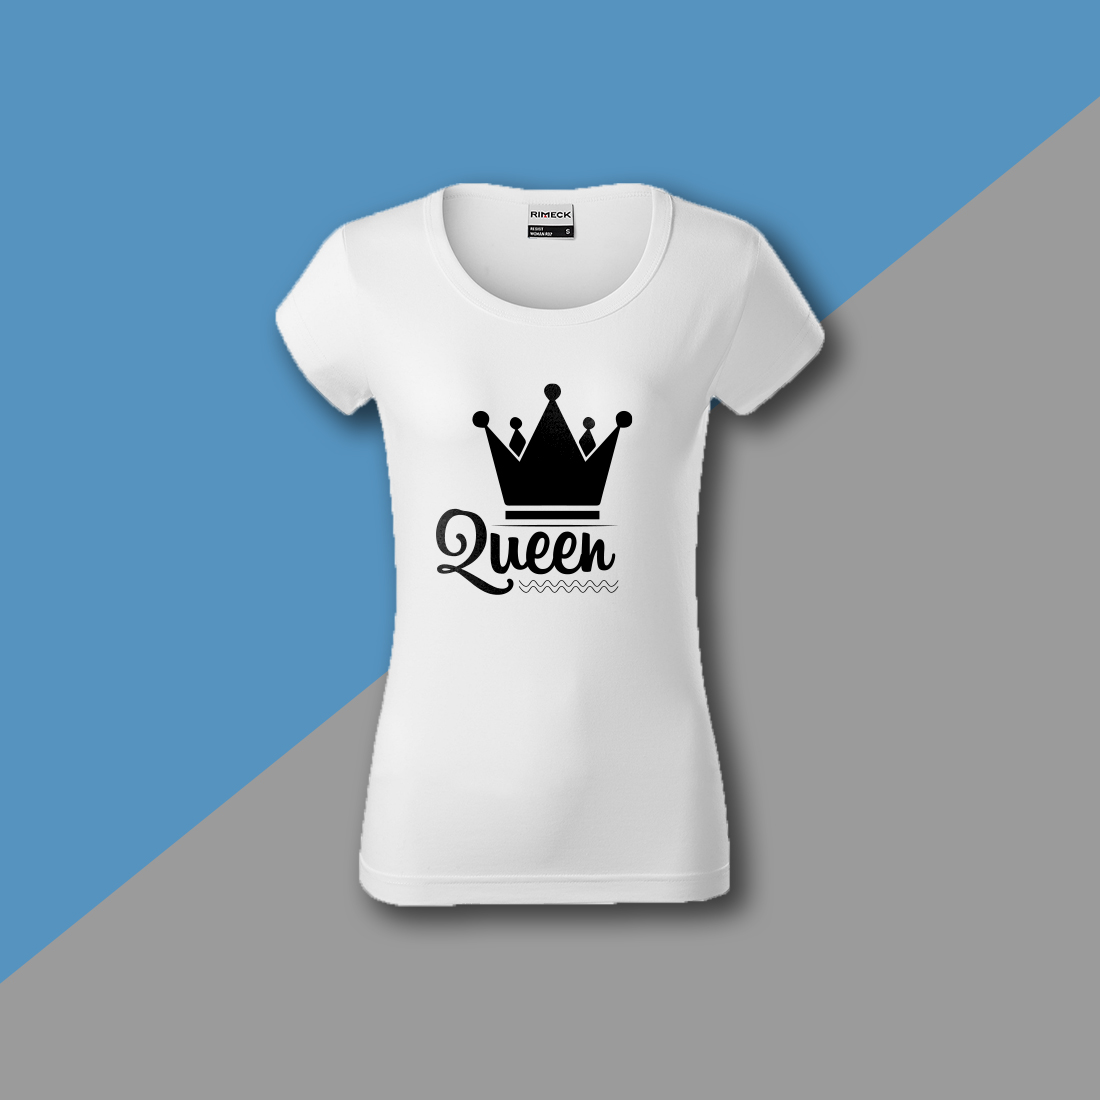 Image of a white t-shirt with a beautiful print of the queens crown